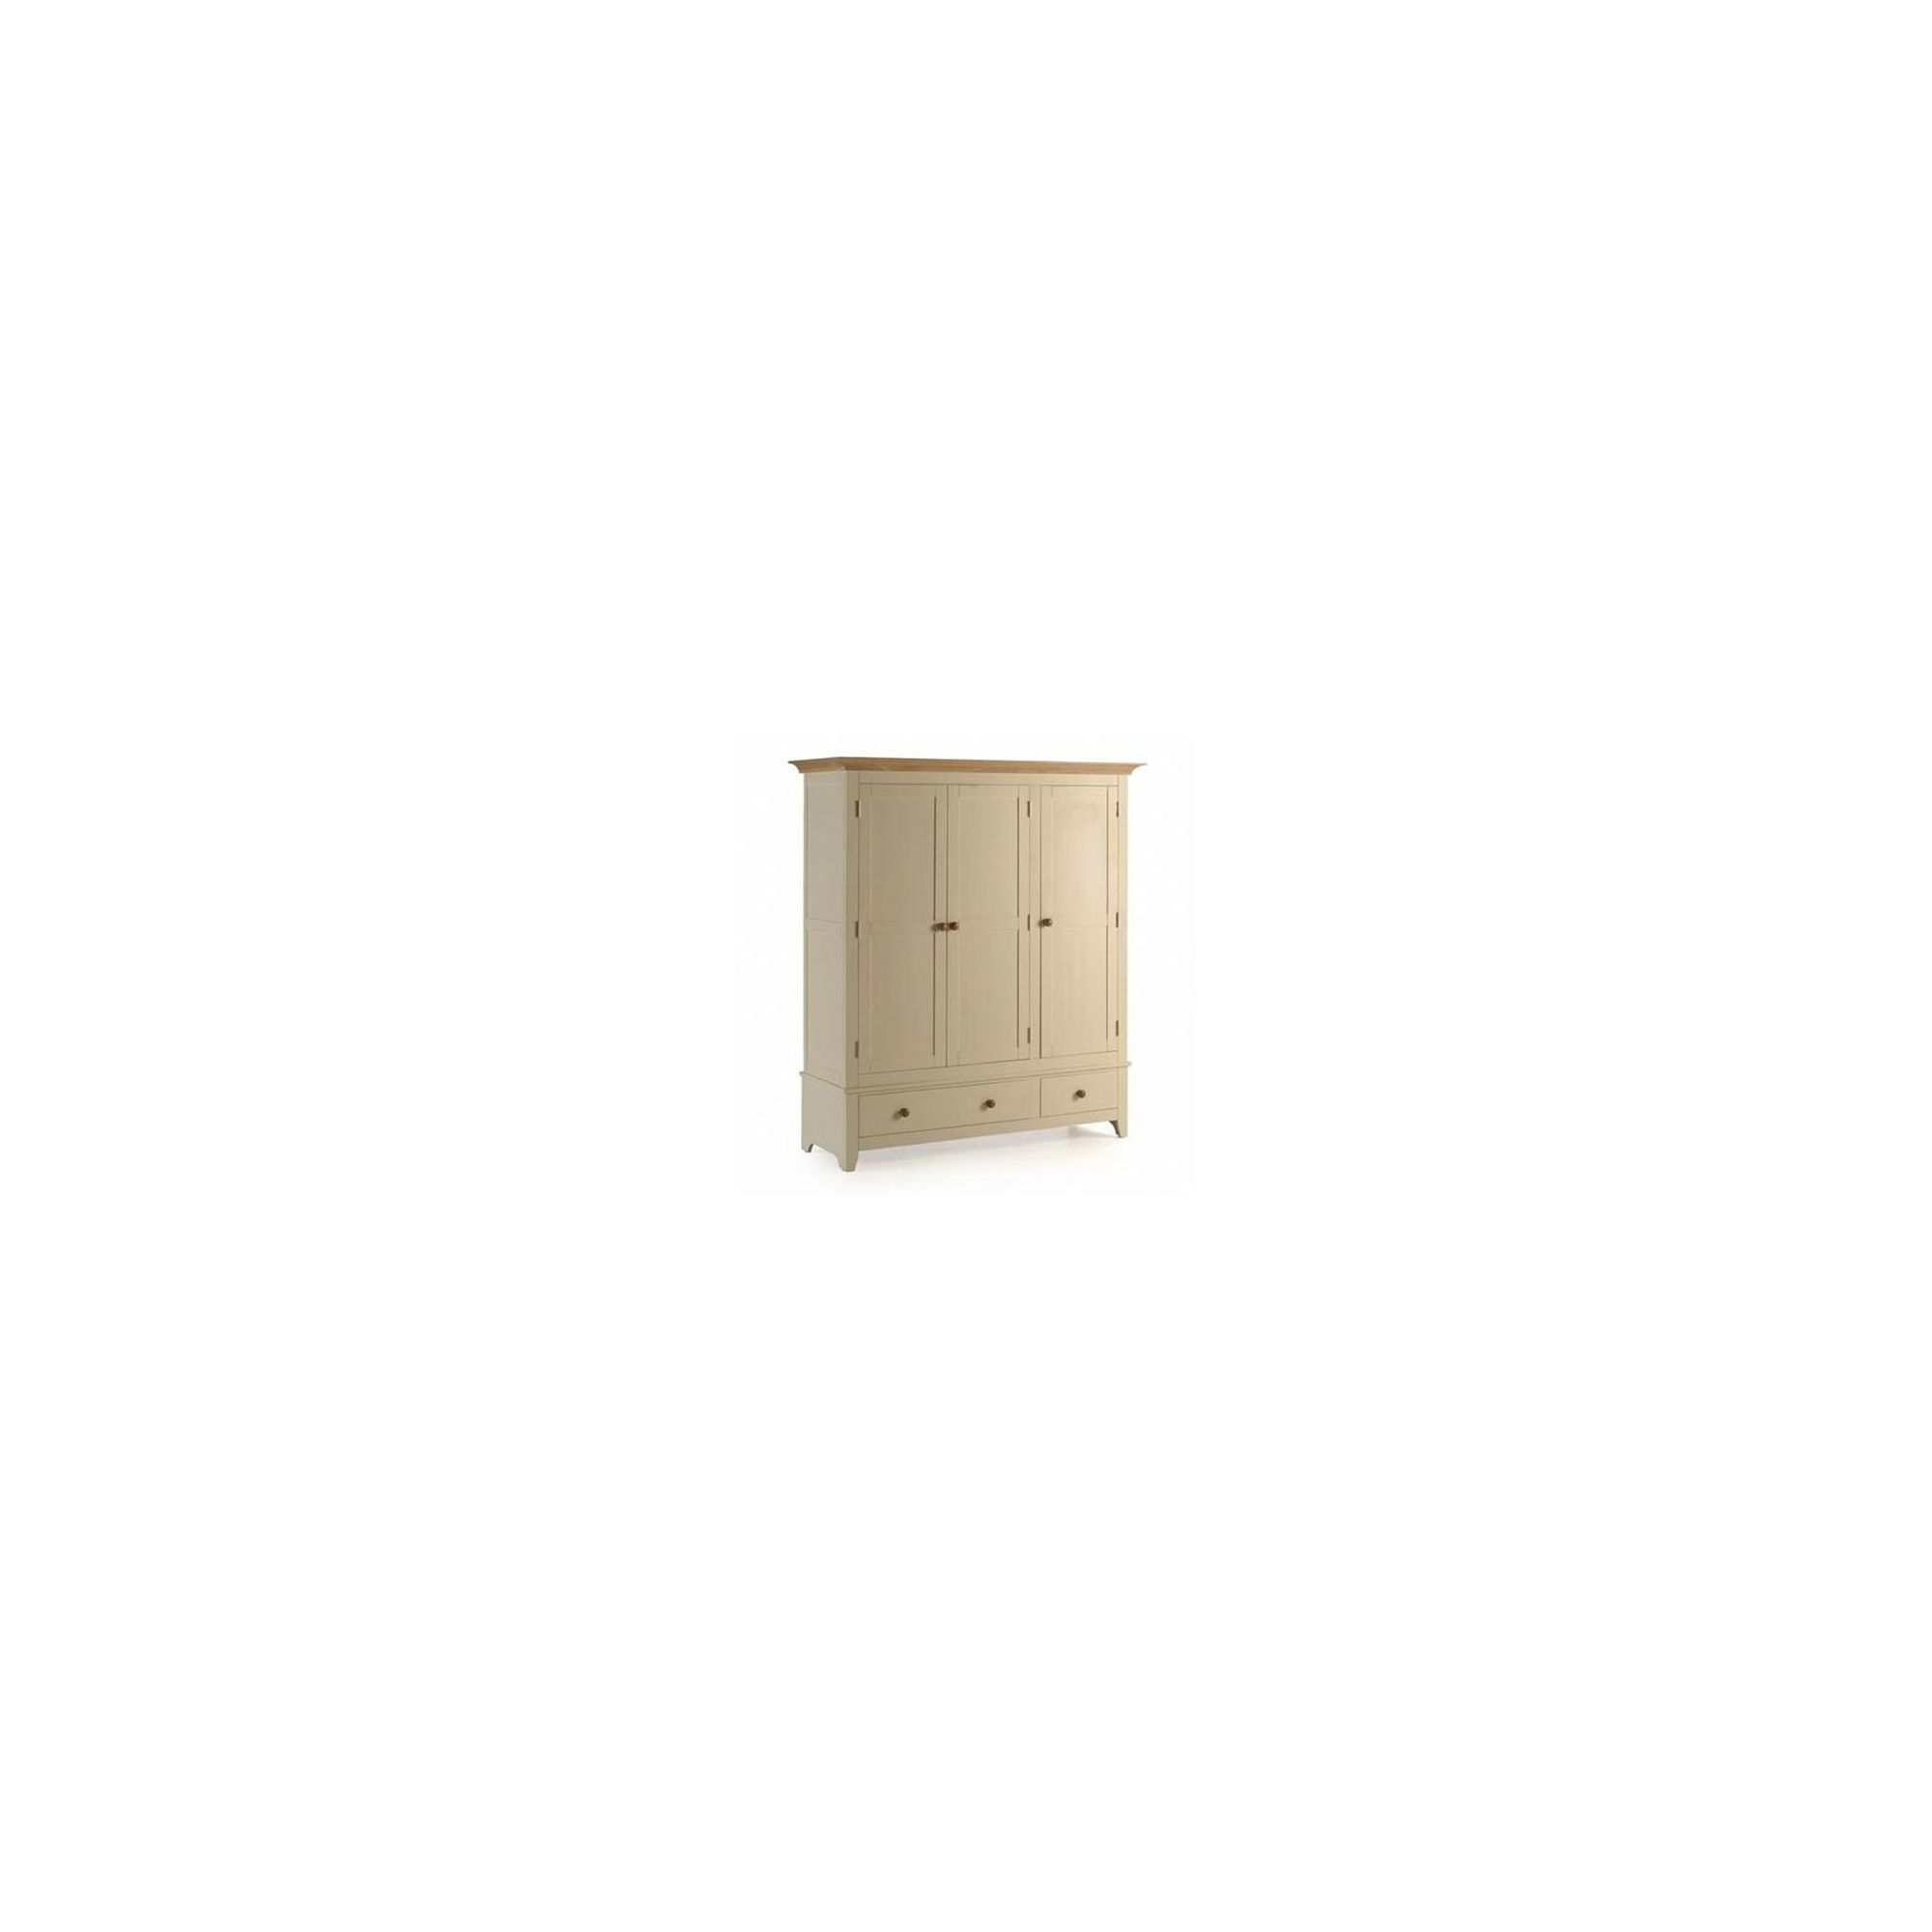 Ametis Camden Painted Pine and Ash Two Drawer Wardrobe in Painted Ivory - 161cm at Tescos Direct